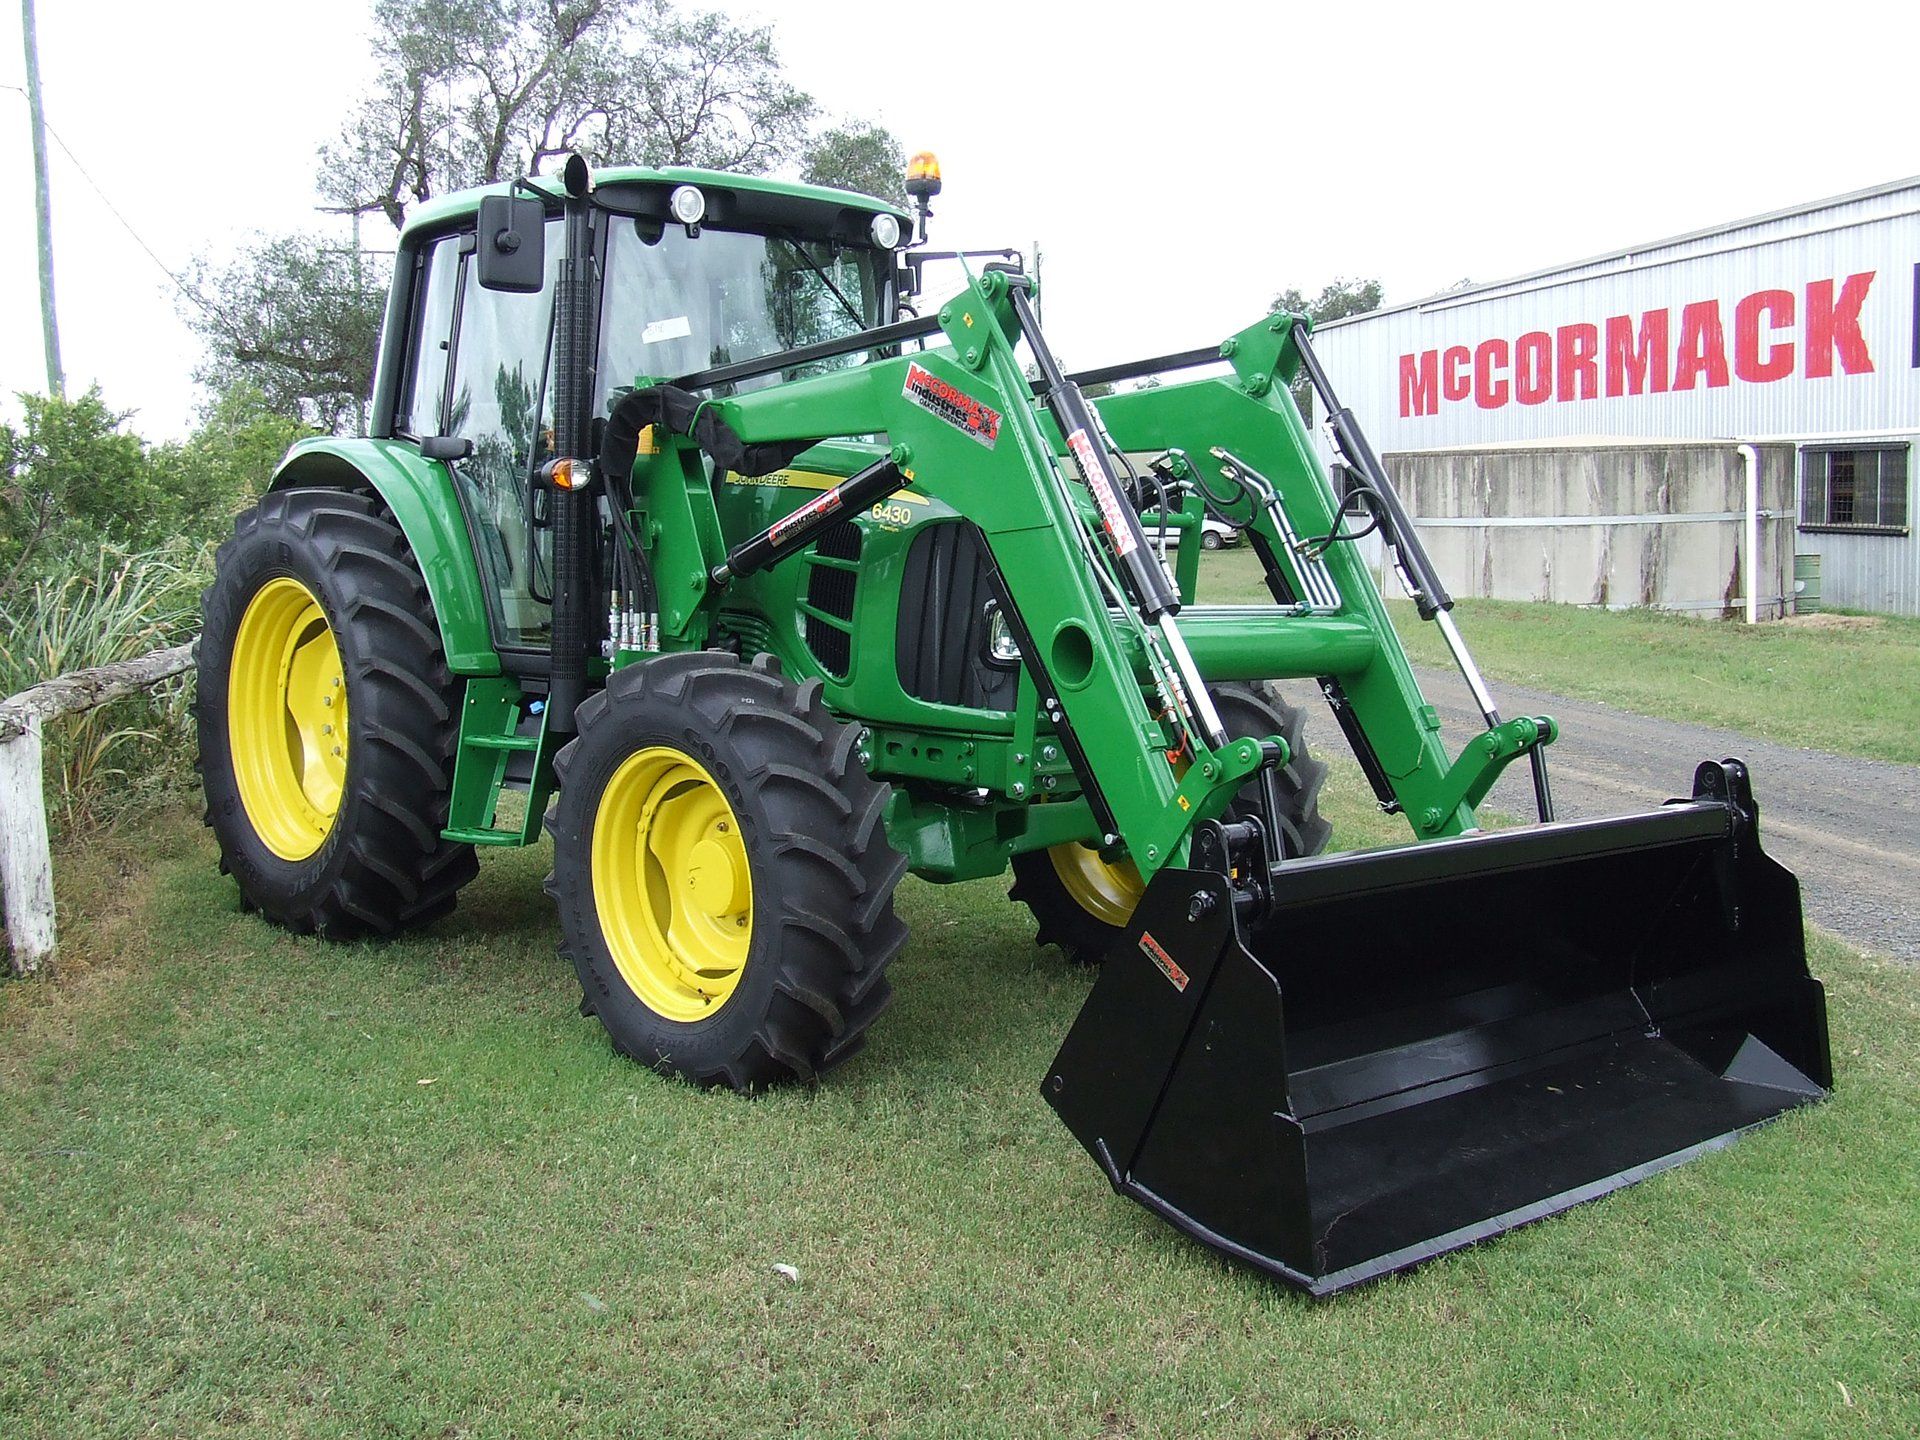 A McCormack Front End Loader with a Four In One Bucket attachment, fitted to a John Deere tractor